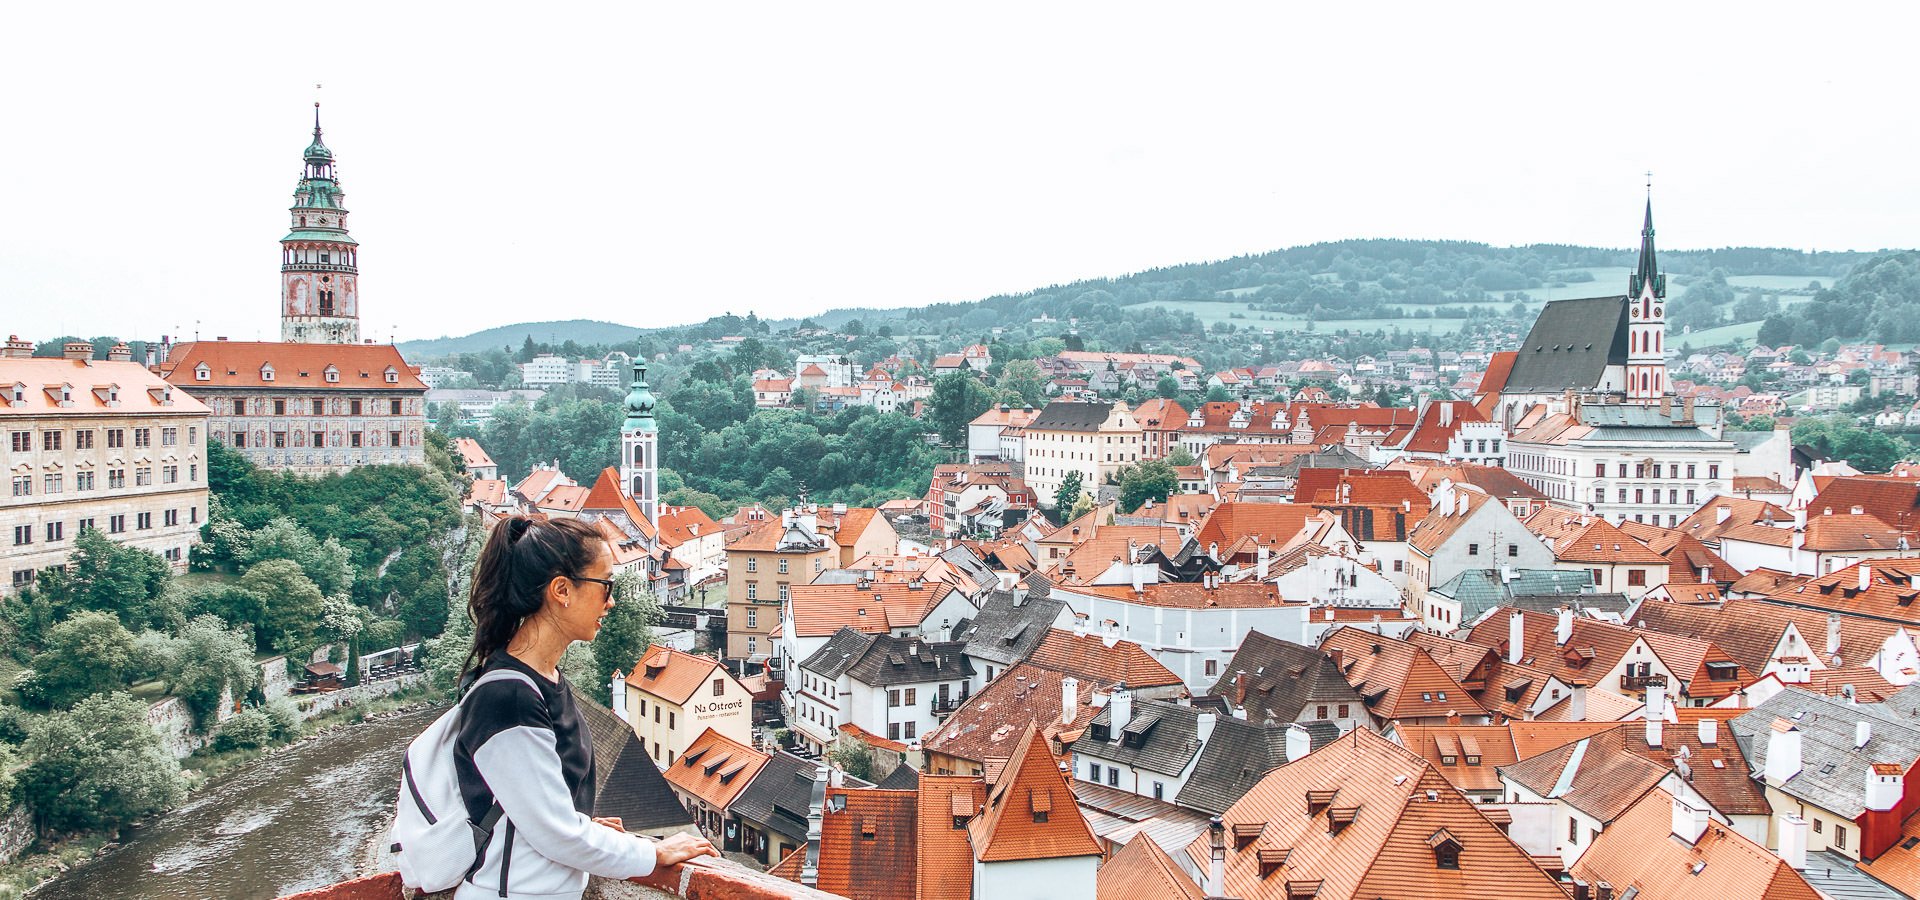 How To Spend A Perfect Weekend In Český Krumlov | London Markets You Need To Visit 6